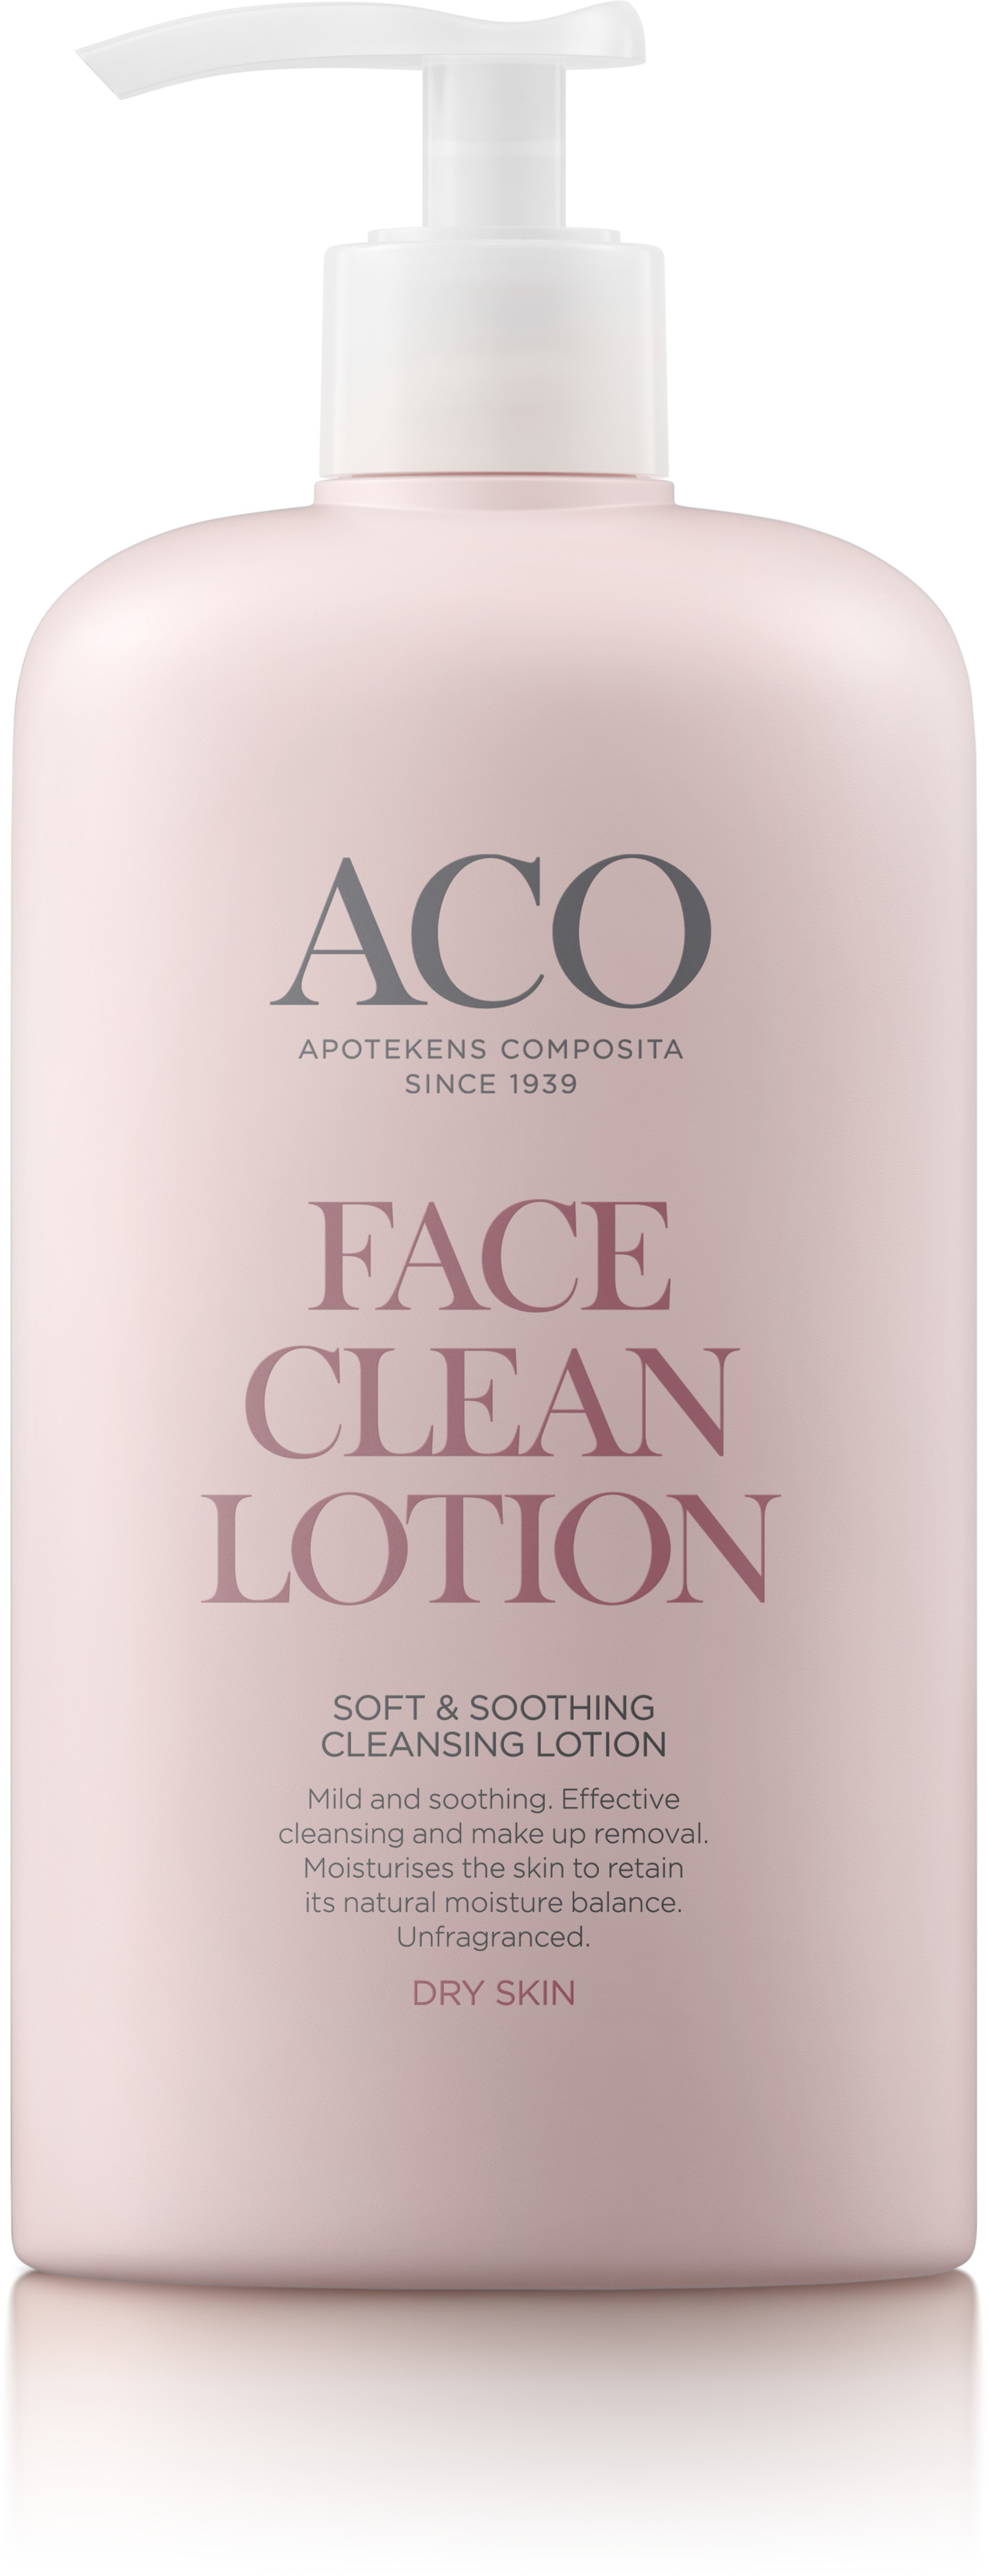 Aco Face Soft & Soothing Cleansing Lotion Ansiktsrengöring 400 ml